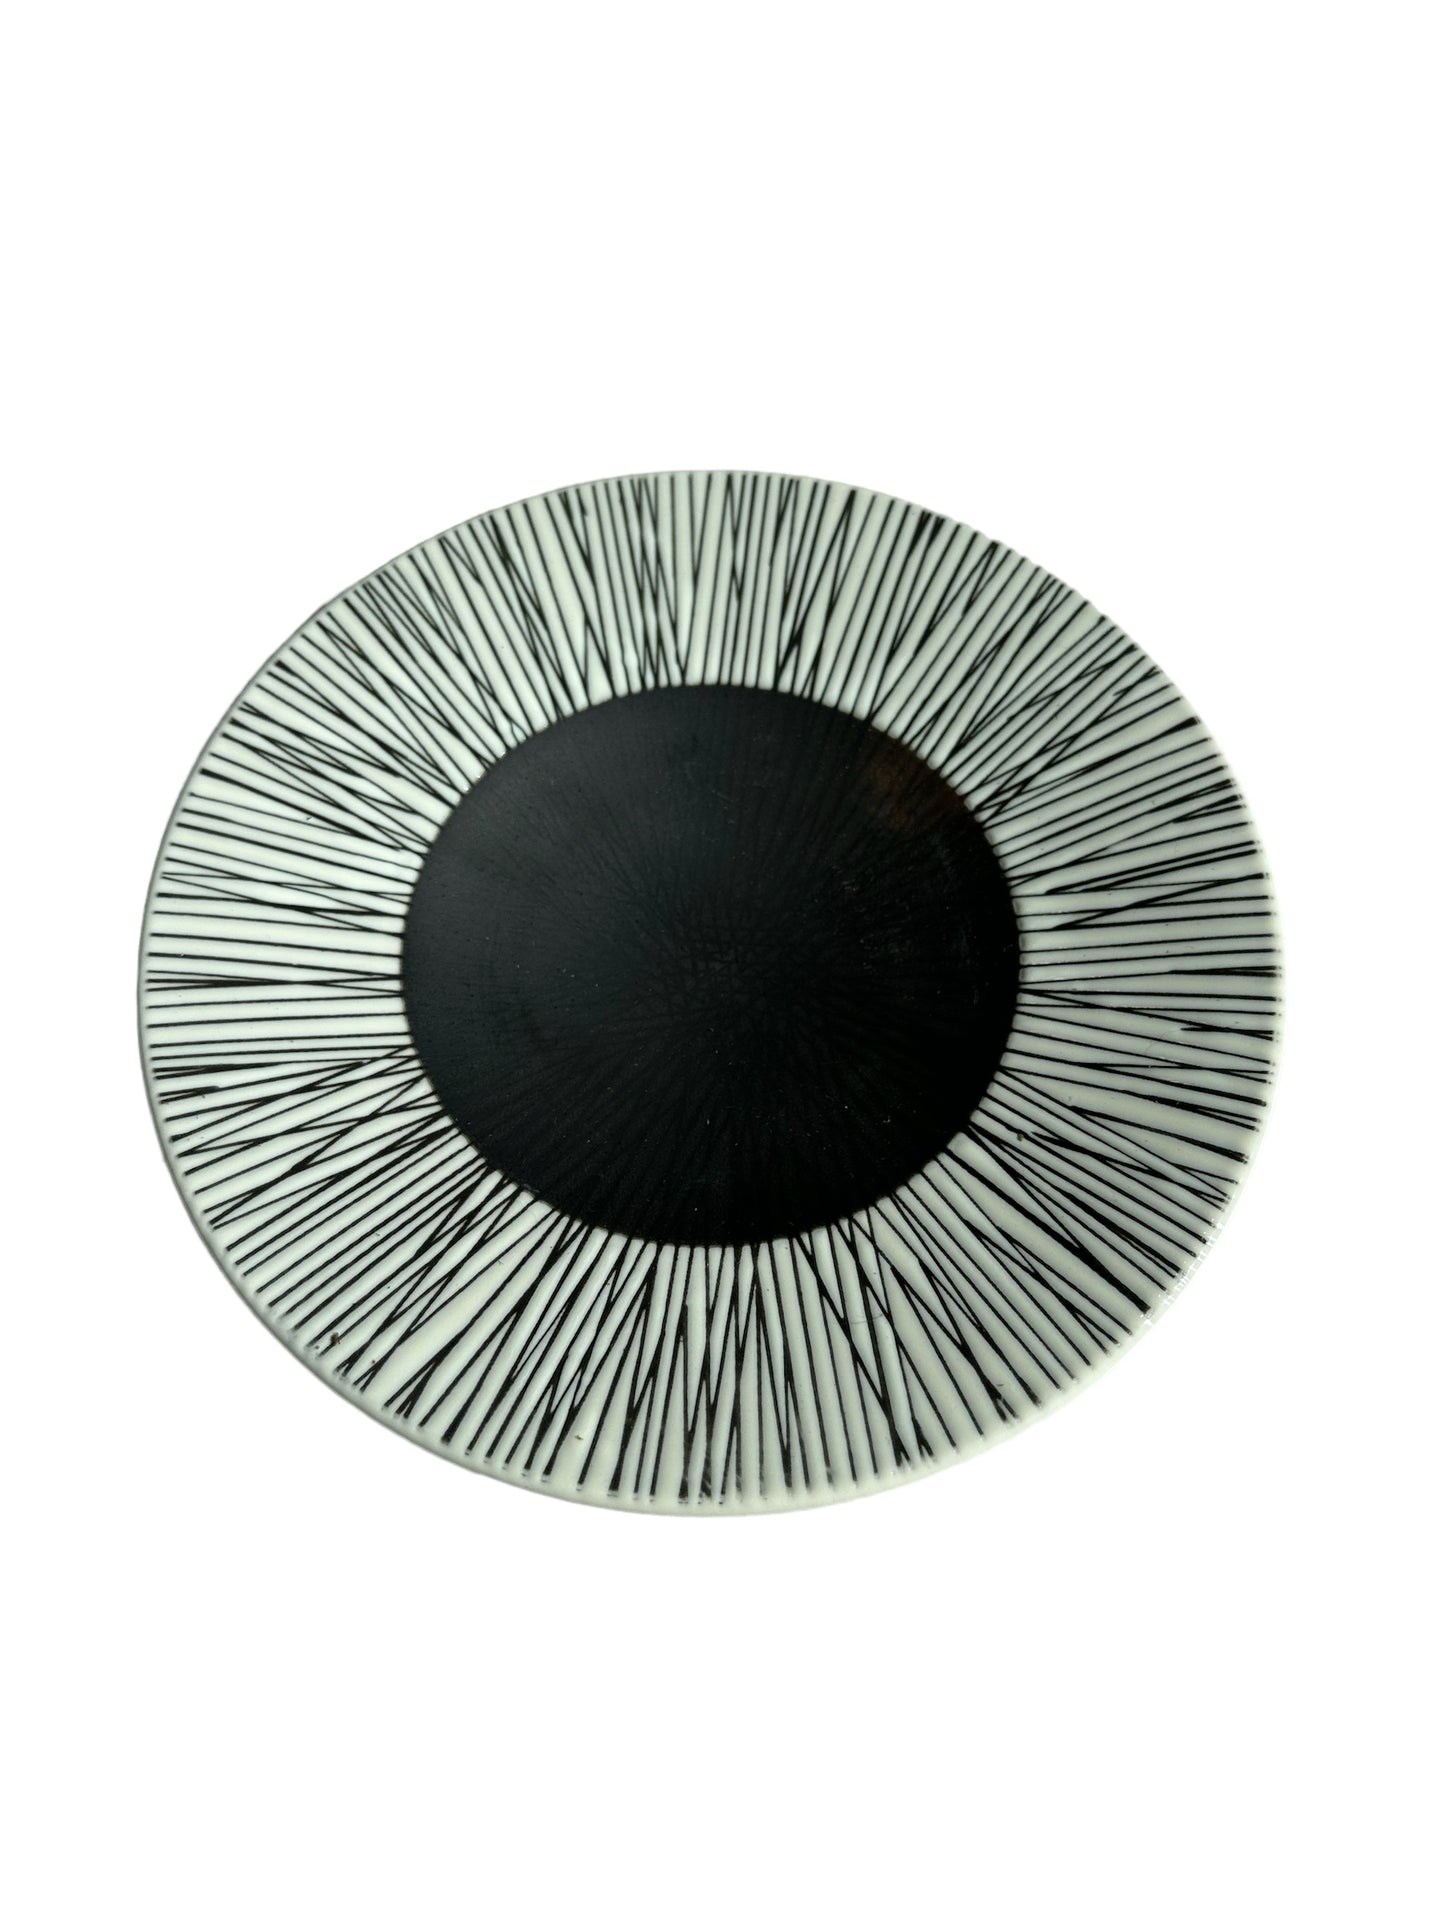 Radial pattern of black lines on 8" decorative plates